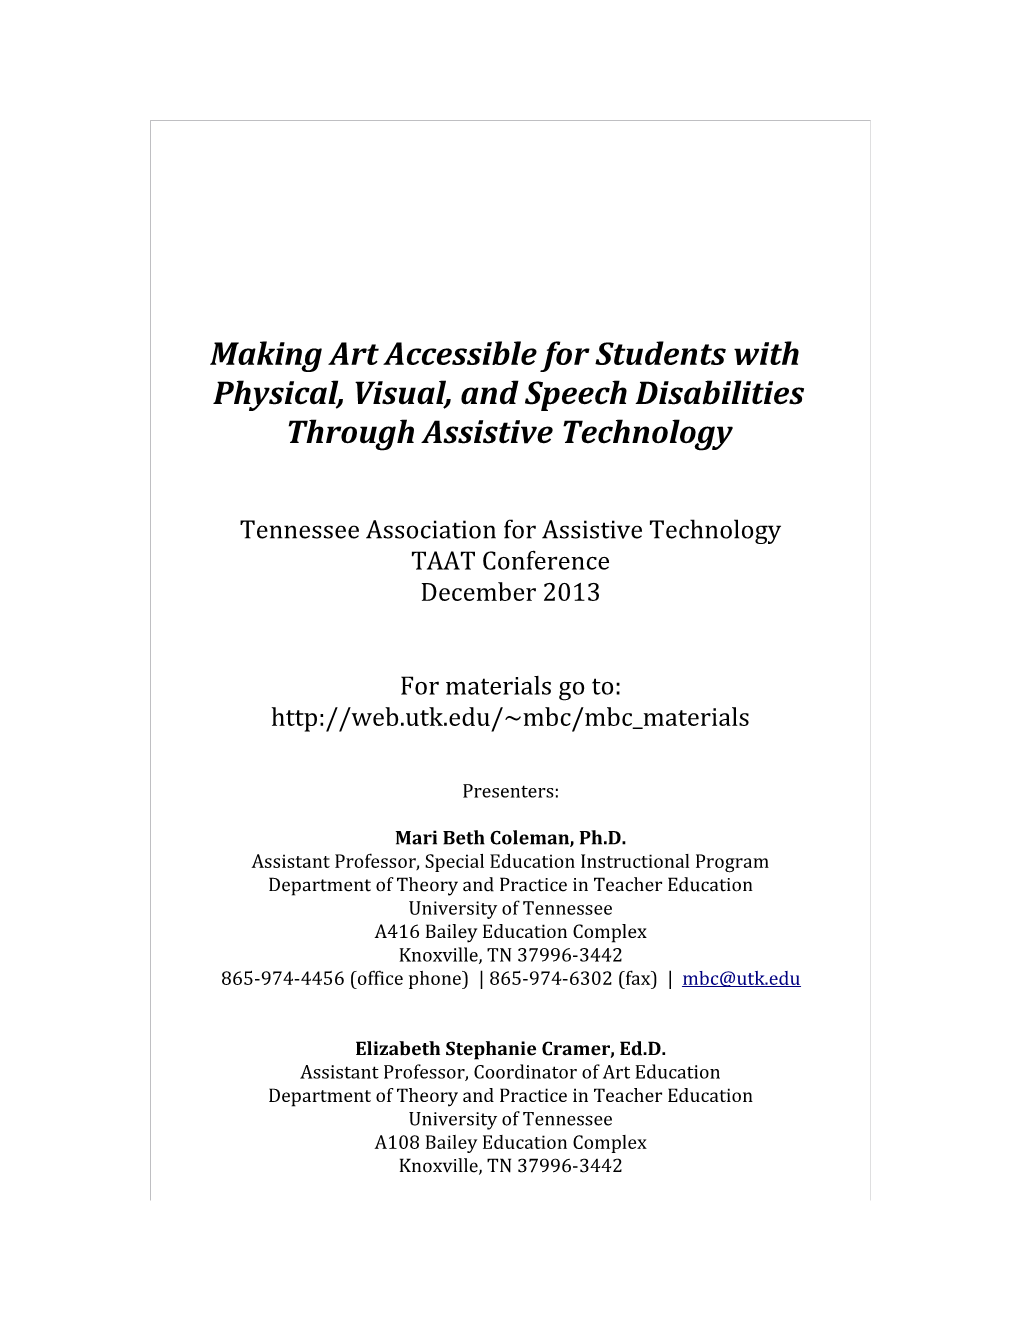 Making Art Accessible for Students With